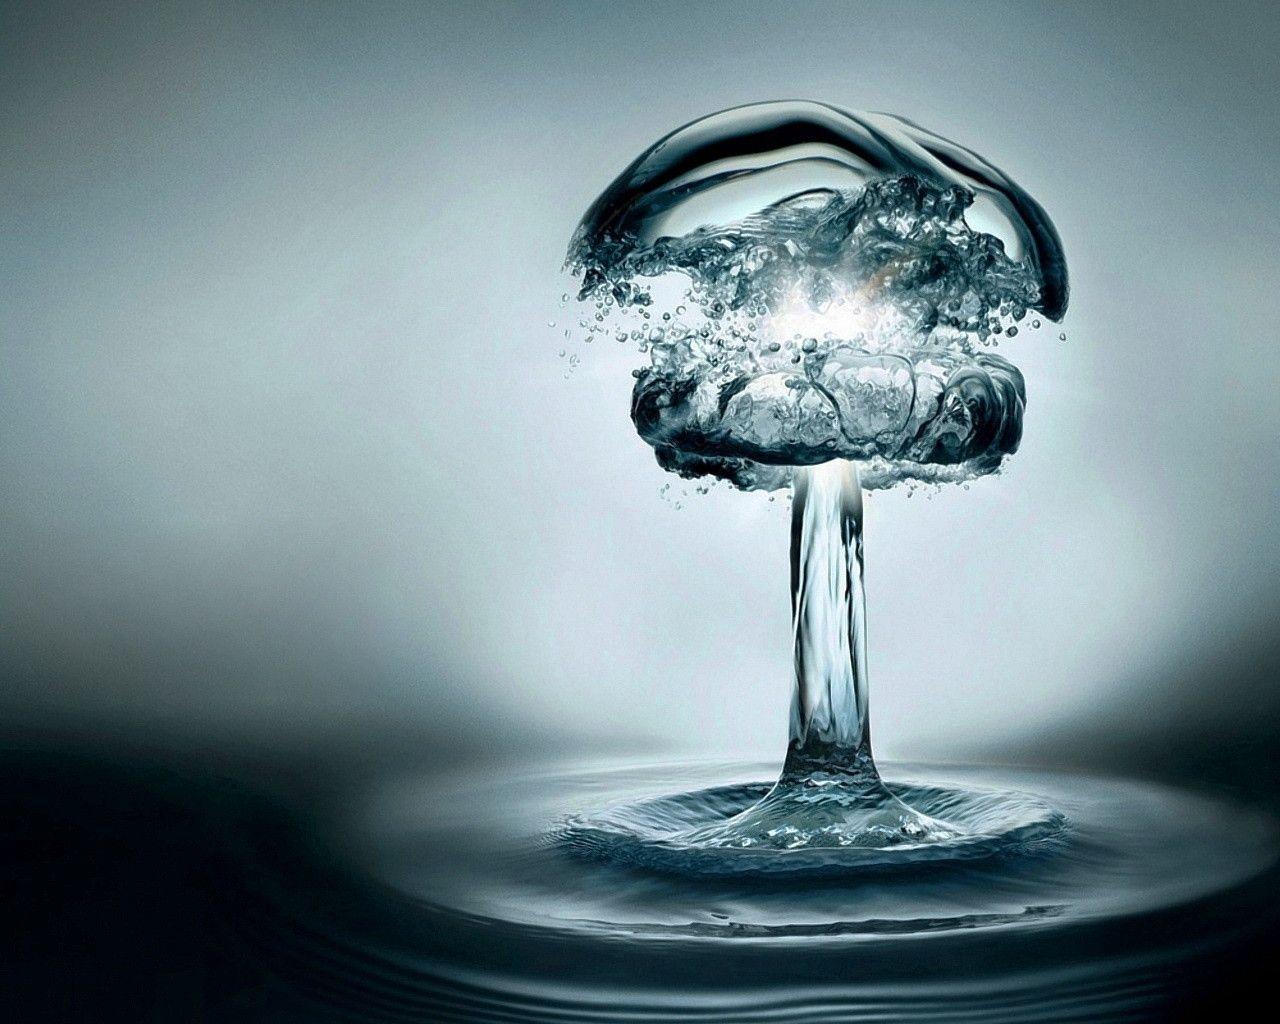 Atomic water explosion wallpaper, music and dance wallpaper